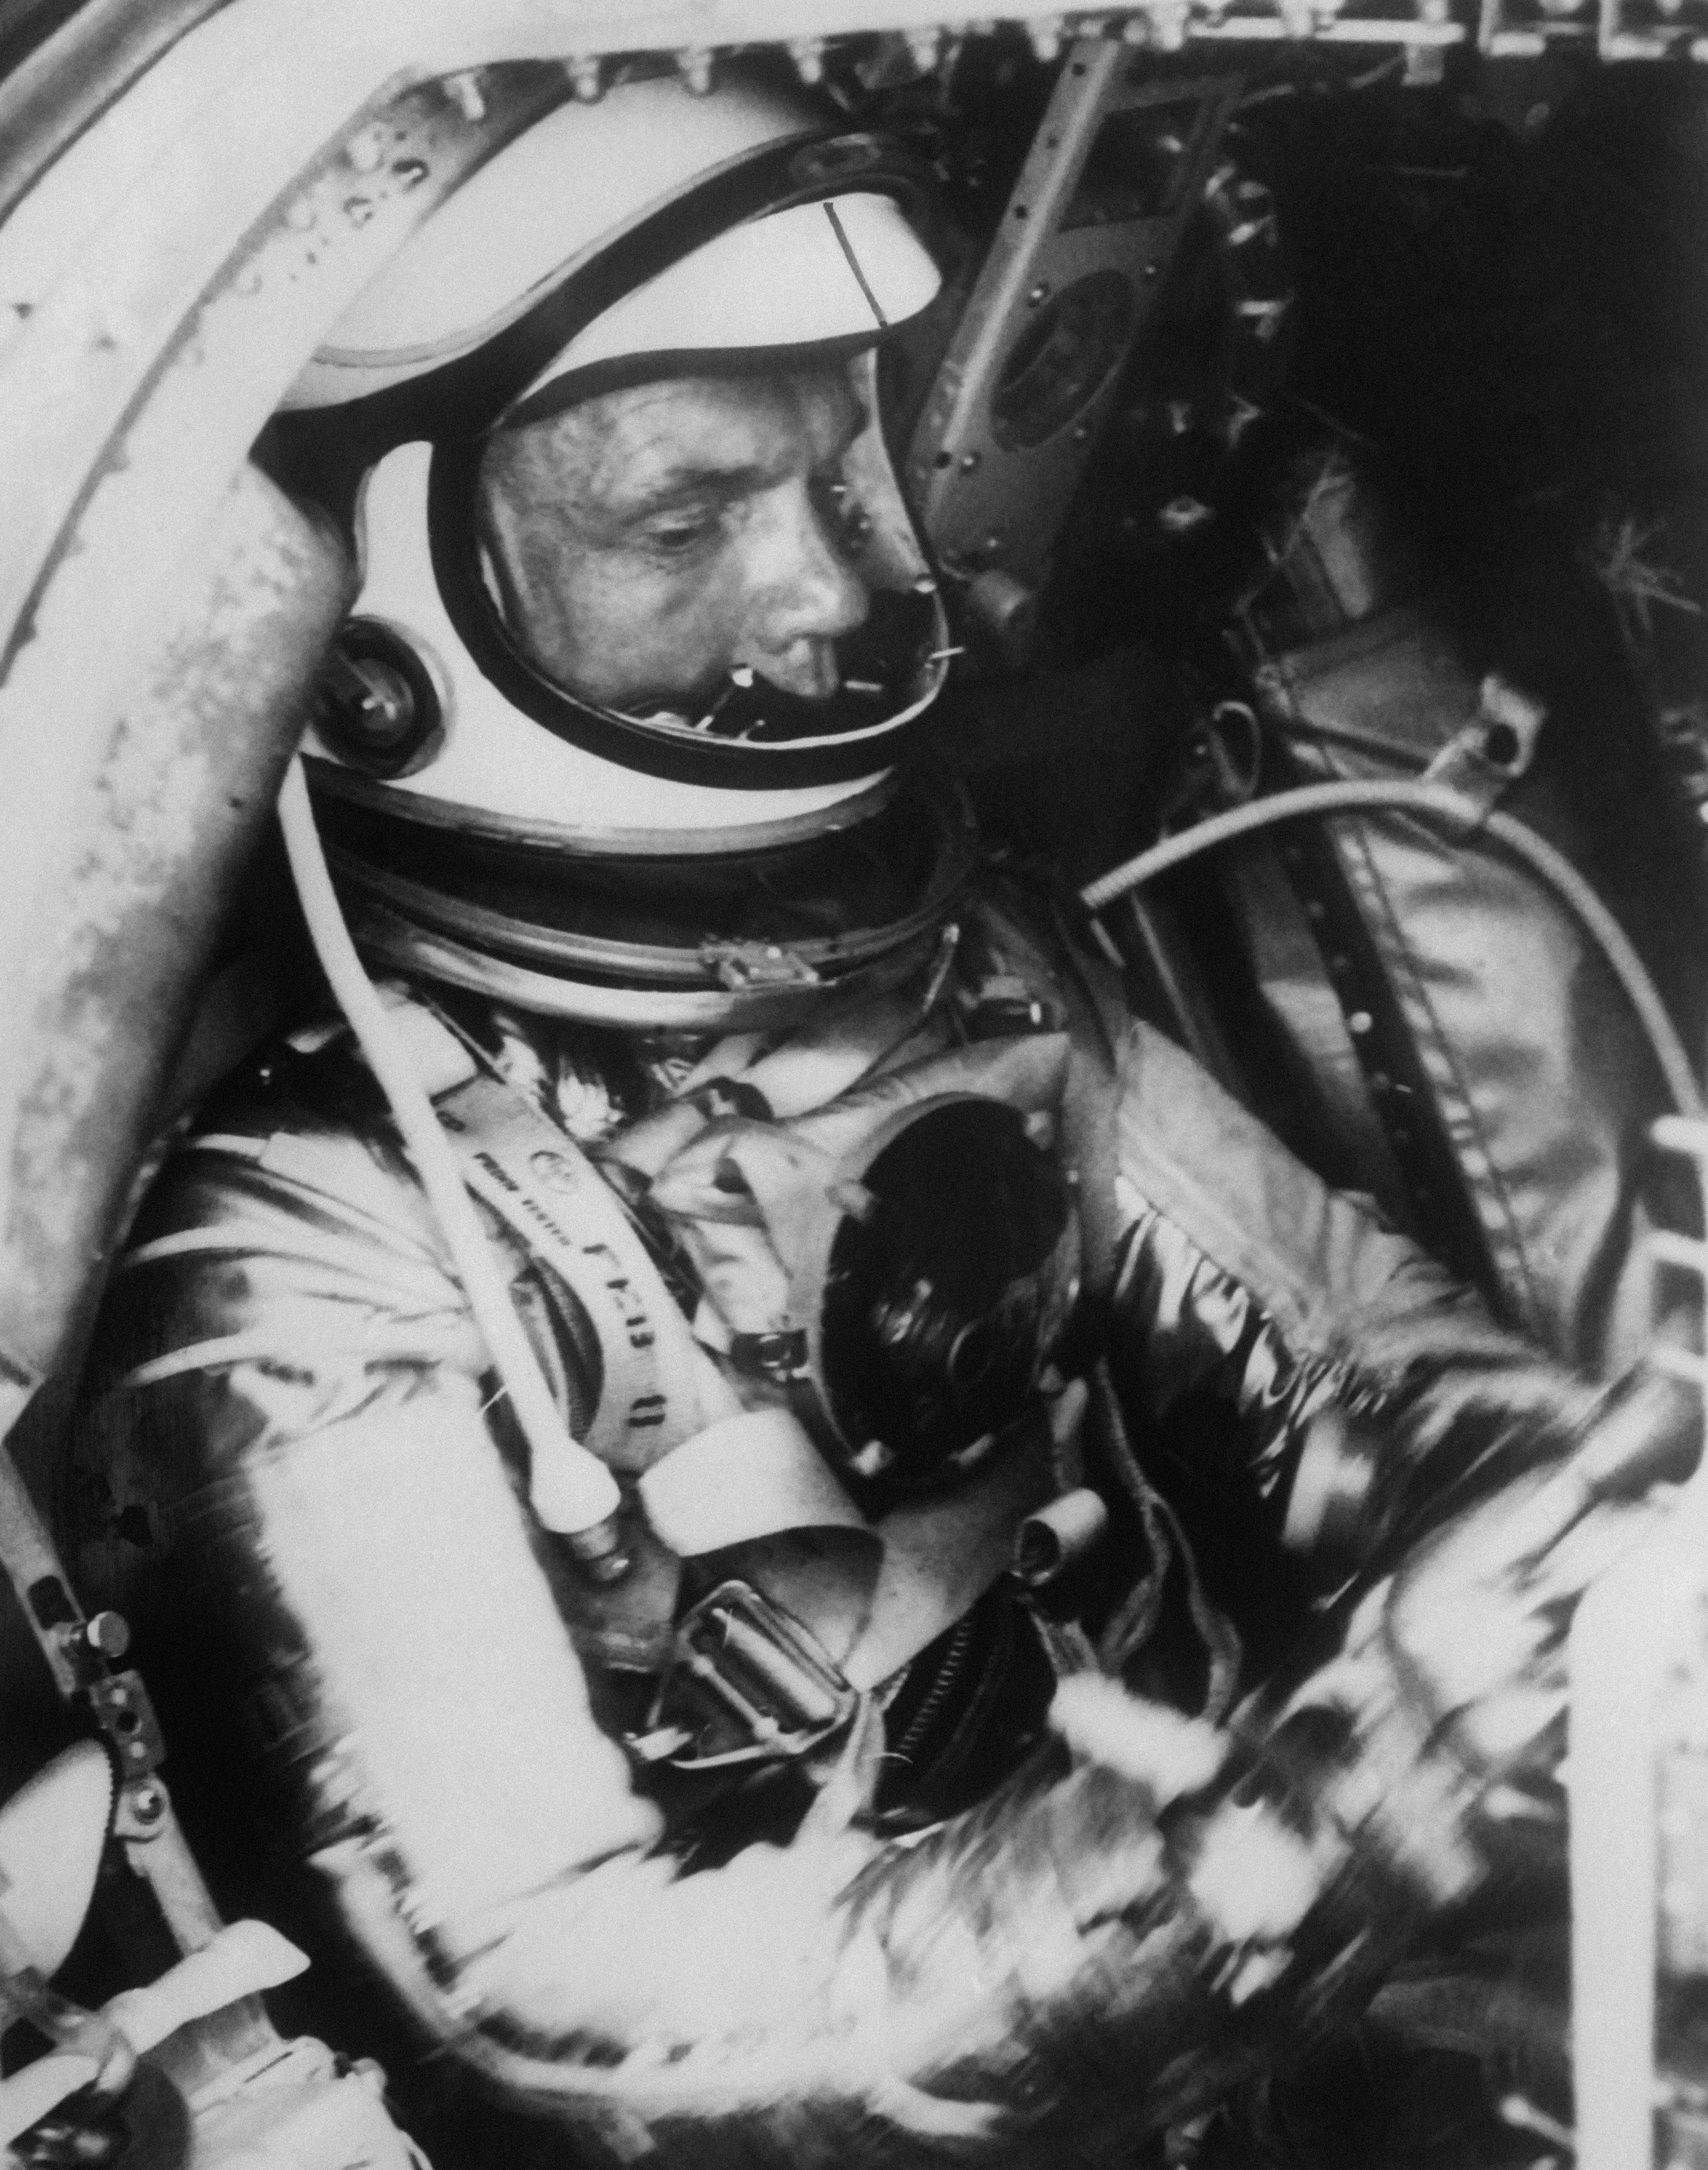 Astronaut Colonel John Glenn Training In His Spatial Suit Aboard Capsule Mercury Before Launching For Three Orbits Around Planet Earth...